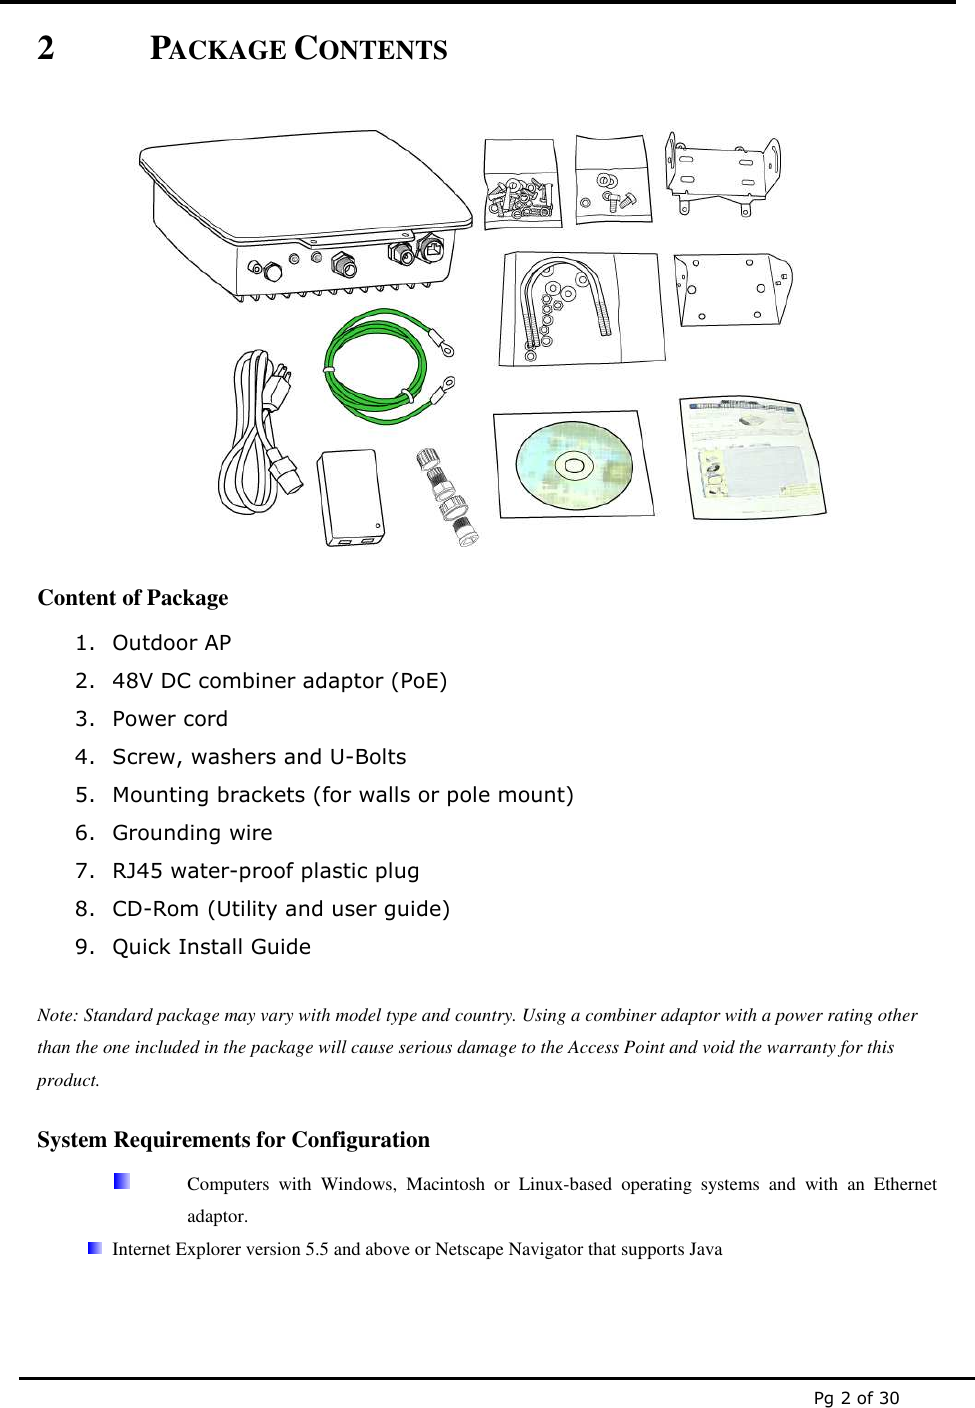  Pg 2 of 30 2 PACKAGE CONTENTS   Content of Package 1. Outdoor AP  2. 48V DC combiner adaptor (PoE) 3. Power cord 4. Screw, washers and U-Bolts 5. Mounting brackets (for walls or pole mount) 6. Grounding wire  7. RJ45 water-proof plastic plug 8. CD-Rom (Utility and user guide)  9. Quick Install Guide  Note: Standard package may vary with model type and country. Using a combiner adaptor with a power rating other than the one included in the package will cause serious damage to the Access Point and void the warranty for this product. System Requirements for Configuration   Computers  with  Windows,  Macintosh  or  Linux-based  operating  systems  and  with  an  Ethernet adaptor.  Internet Explorer version 5.5 and above or Netscape Navigator that supports Java 